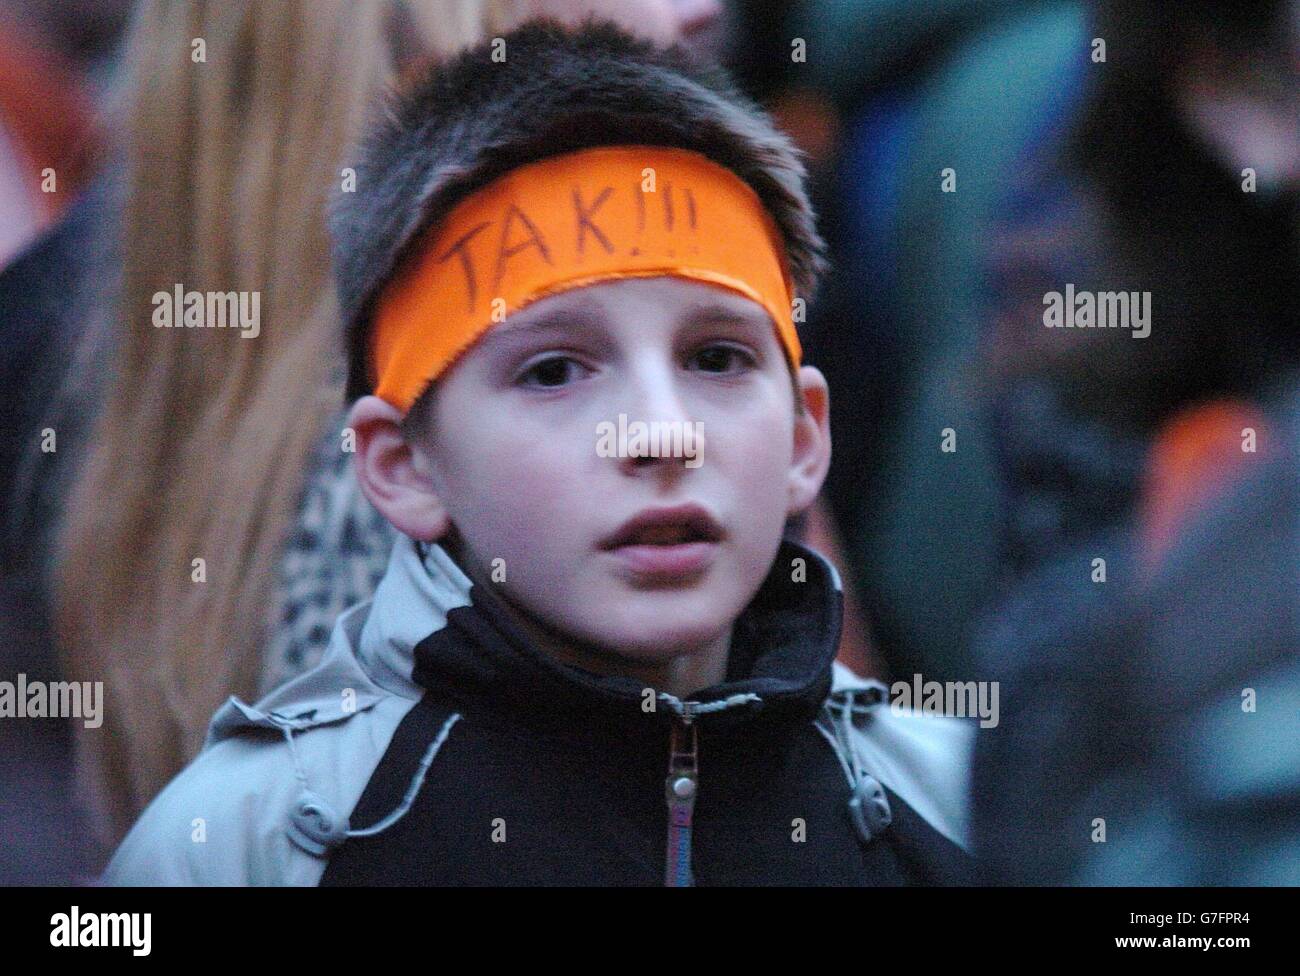 A young Ukrainian joins others from across Britain to gather at the Ukrainian Embassy in London's Holland Park to show their support for support opposition candidate for, Viktor Yuschenkoc and the escalating political crising in their home country. Stock Photo